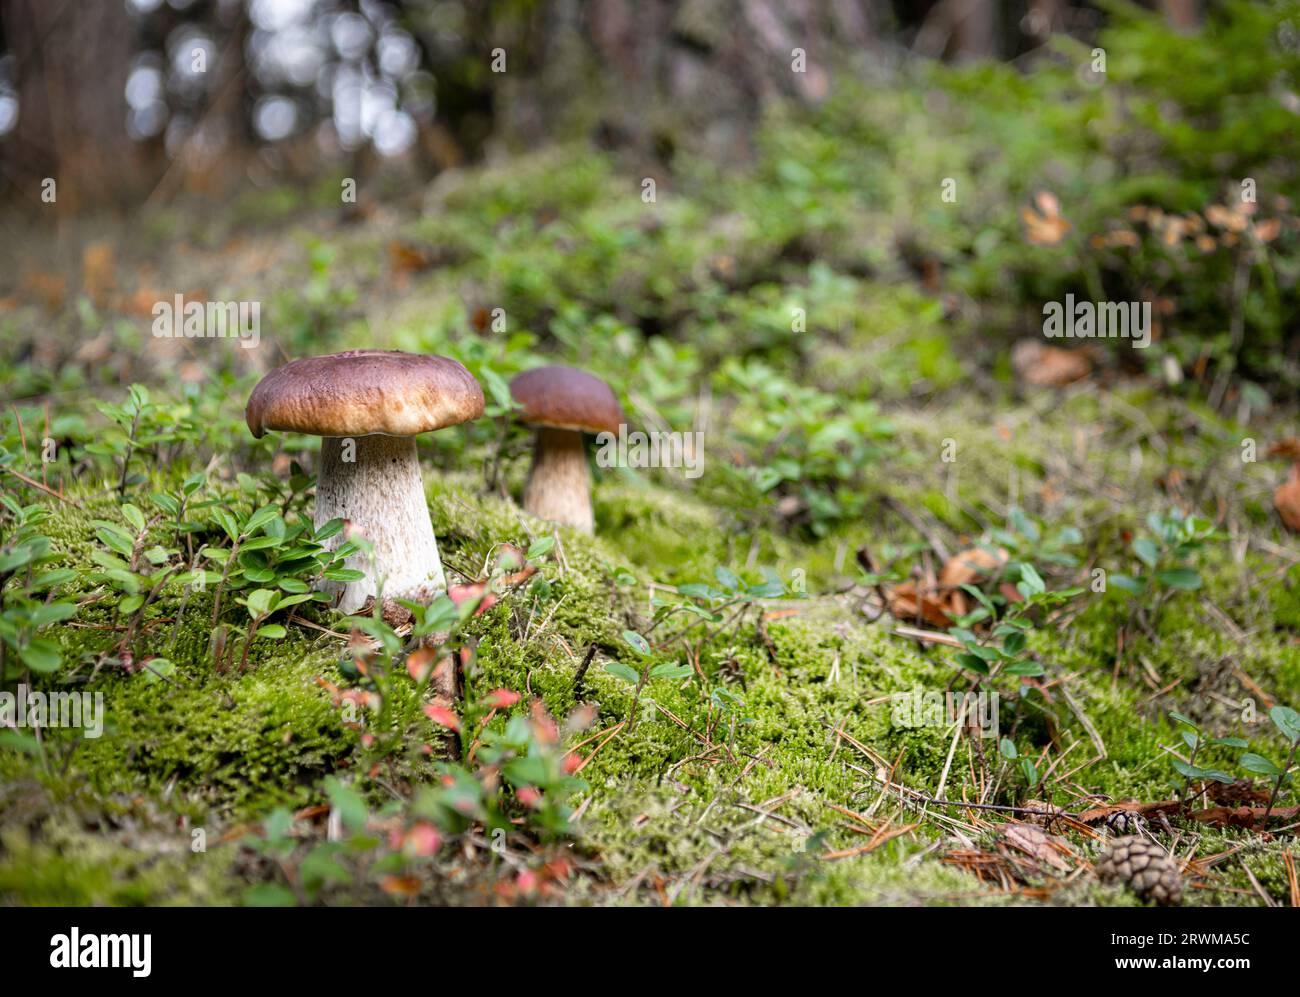 two Porcini mushrooms, scientifically known as 'Boletus edulis,' growing amidst the lush green moss and grass on the forest floor during the autumn se Stock Photo